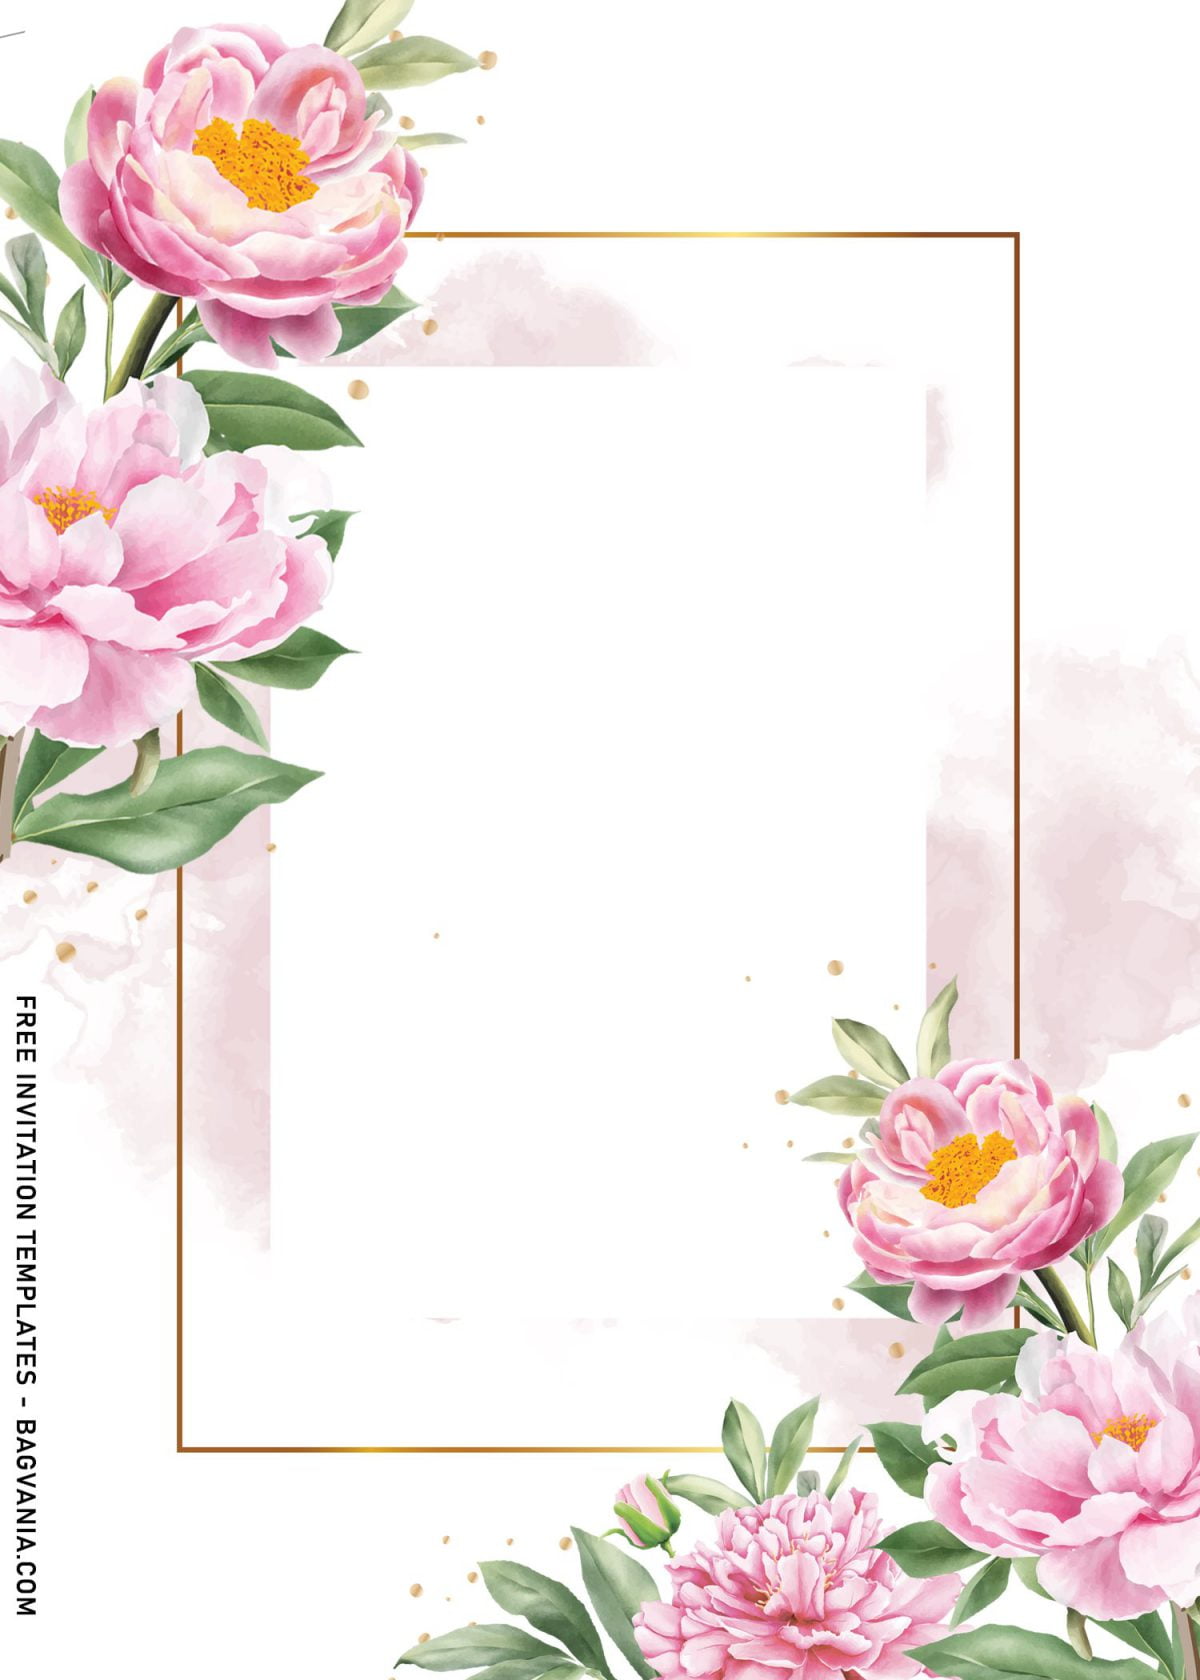 9+ Beautiful Dusty Rose Birthday Invitation Templates and has watercolor roses and magnolia